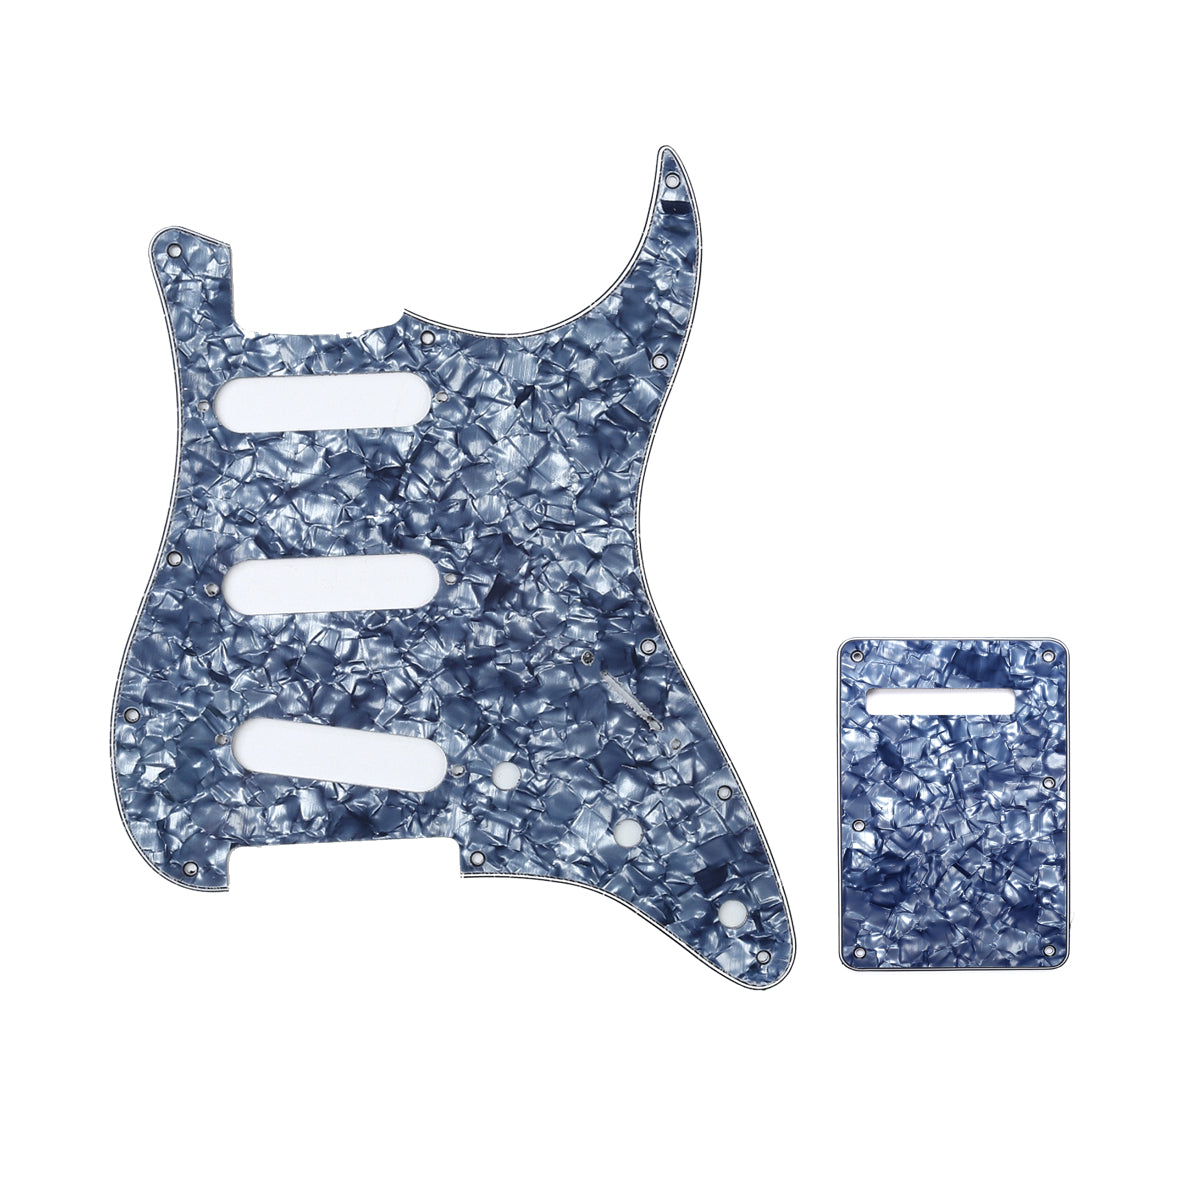 Musiclily SSS 11 Hole Strat Guitar Pickguard and BackPlate Set for Fender USA/Mexican Standard Stratocaster Modern Style, 4Ply Grey Pearl